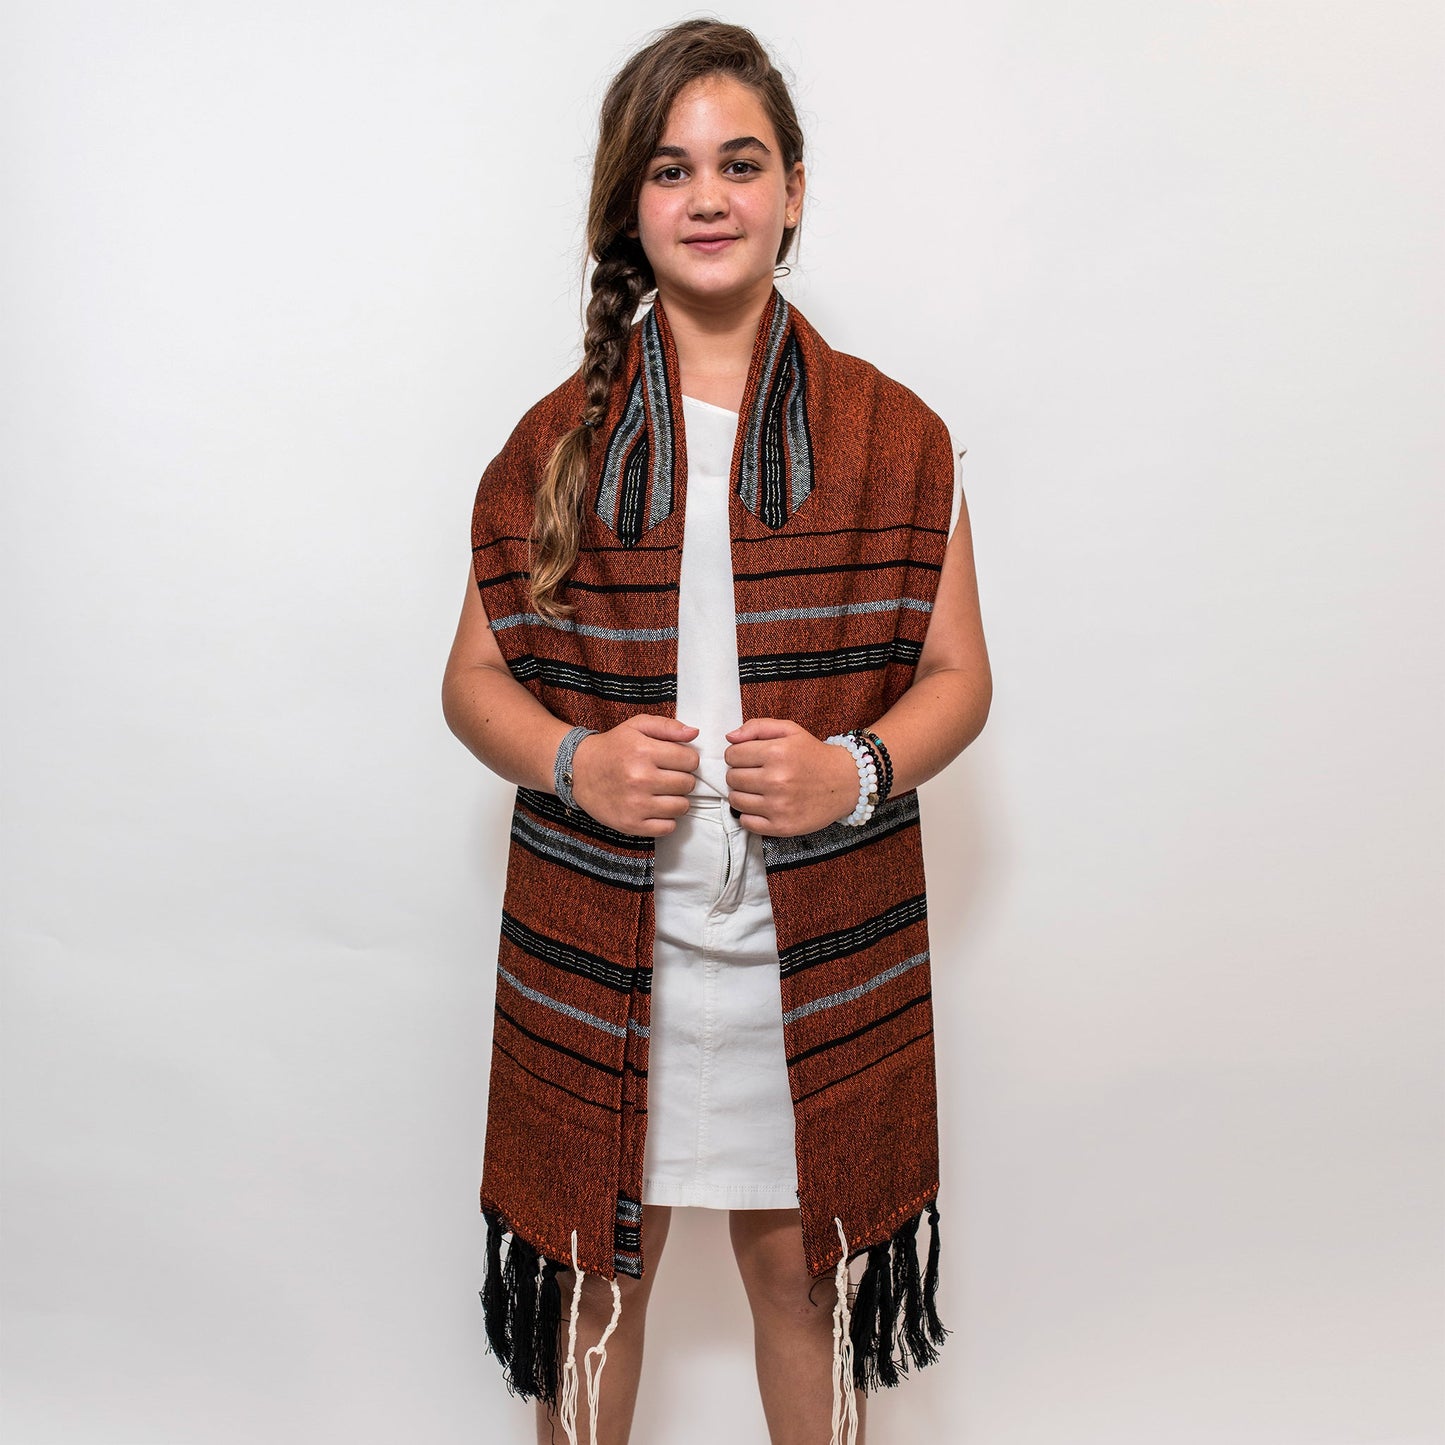 Solomon - Wool Tallit - Black and Gray with Gold and Silver on Orange